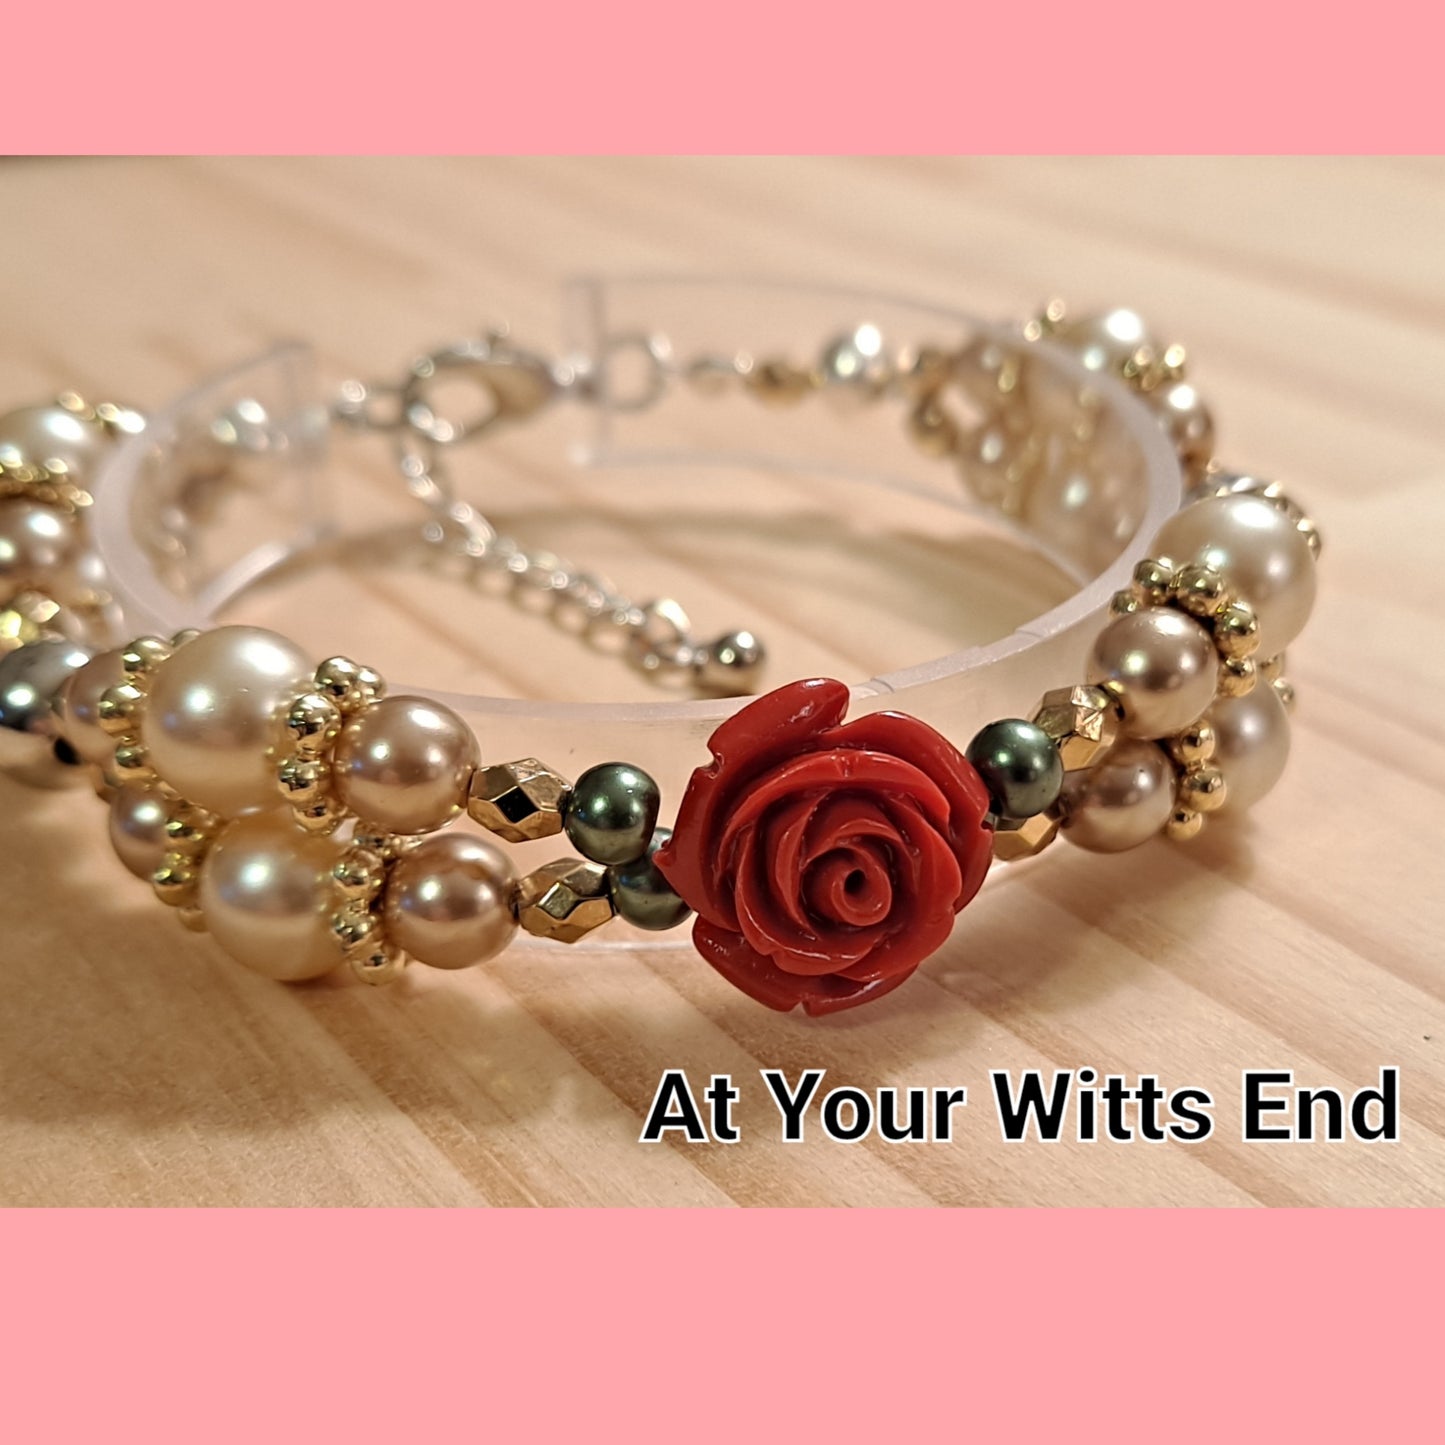 Gorgeous Red Rose & Pearl Bracelet